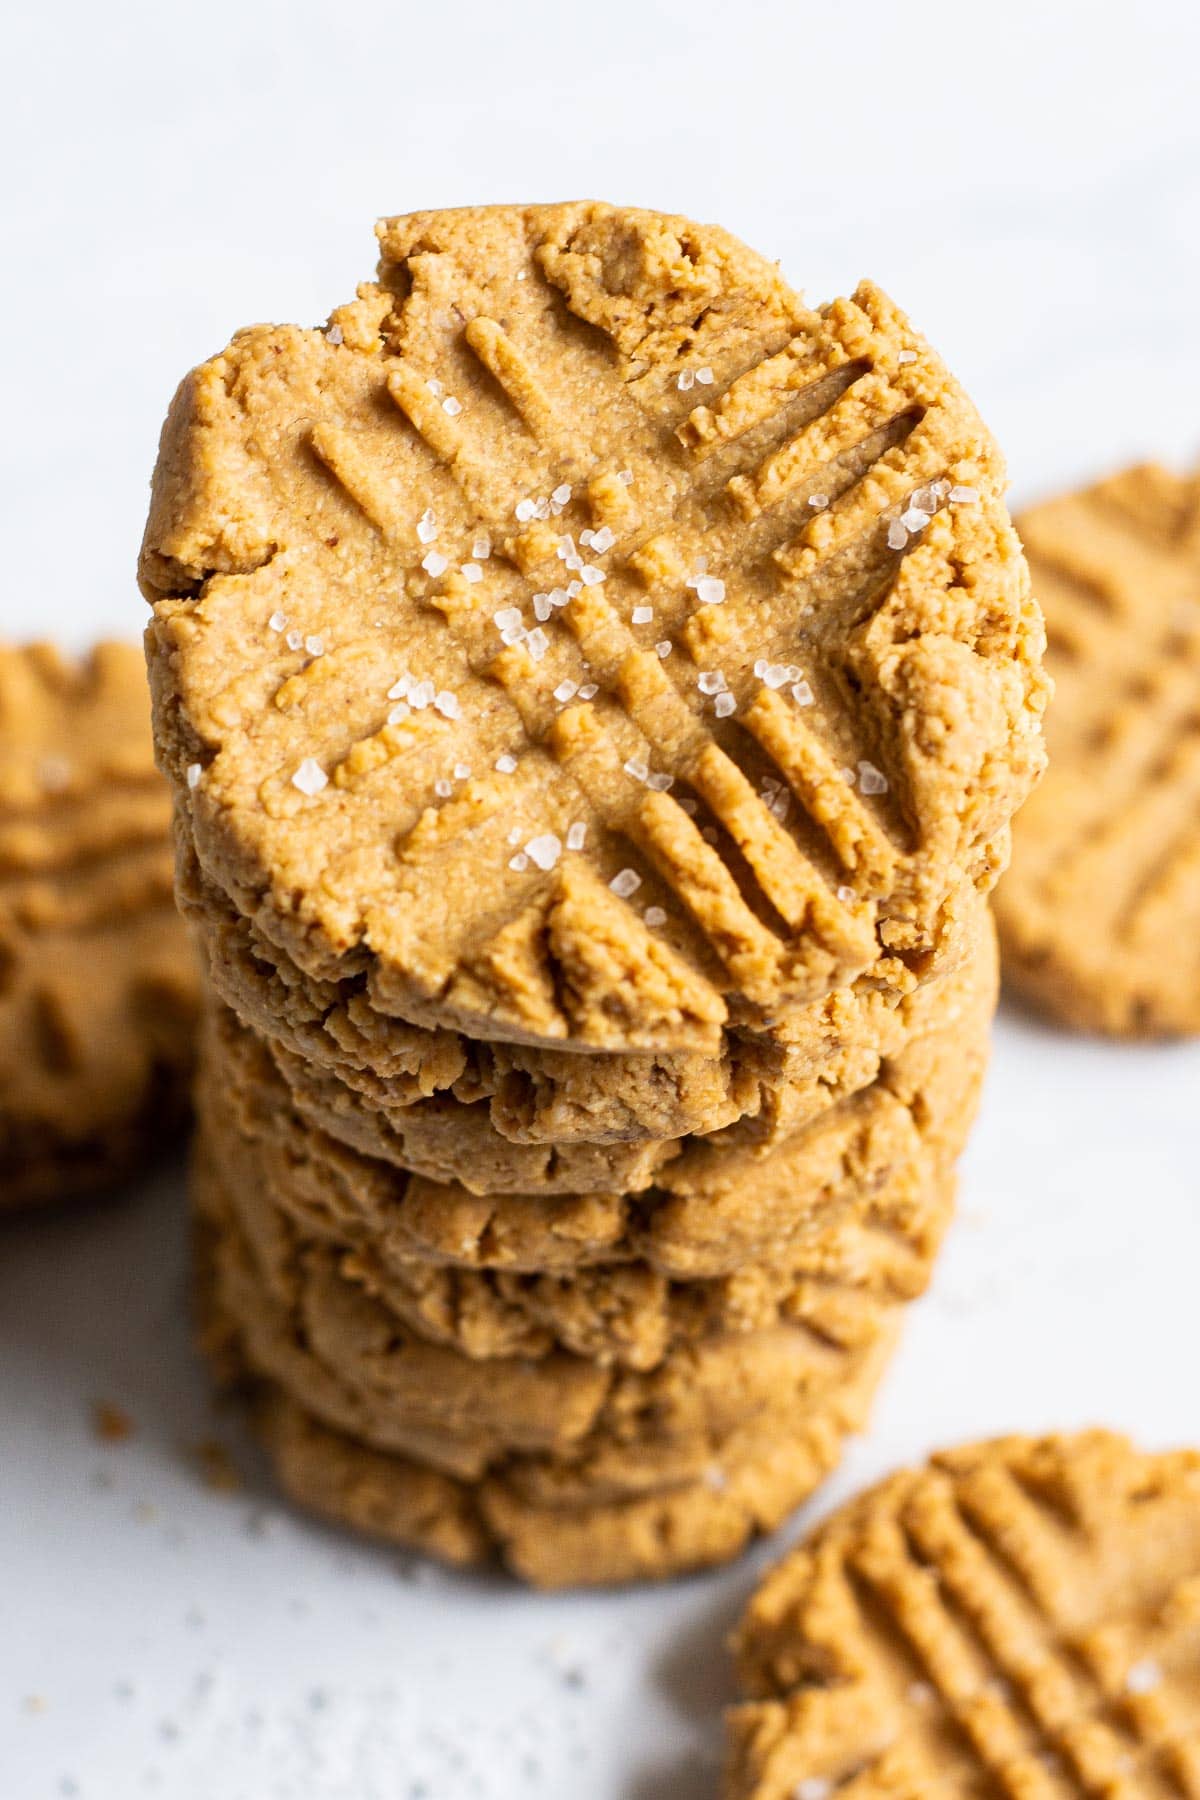 A stack of healthy peanut butter cookies sprinkled with sea salt.